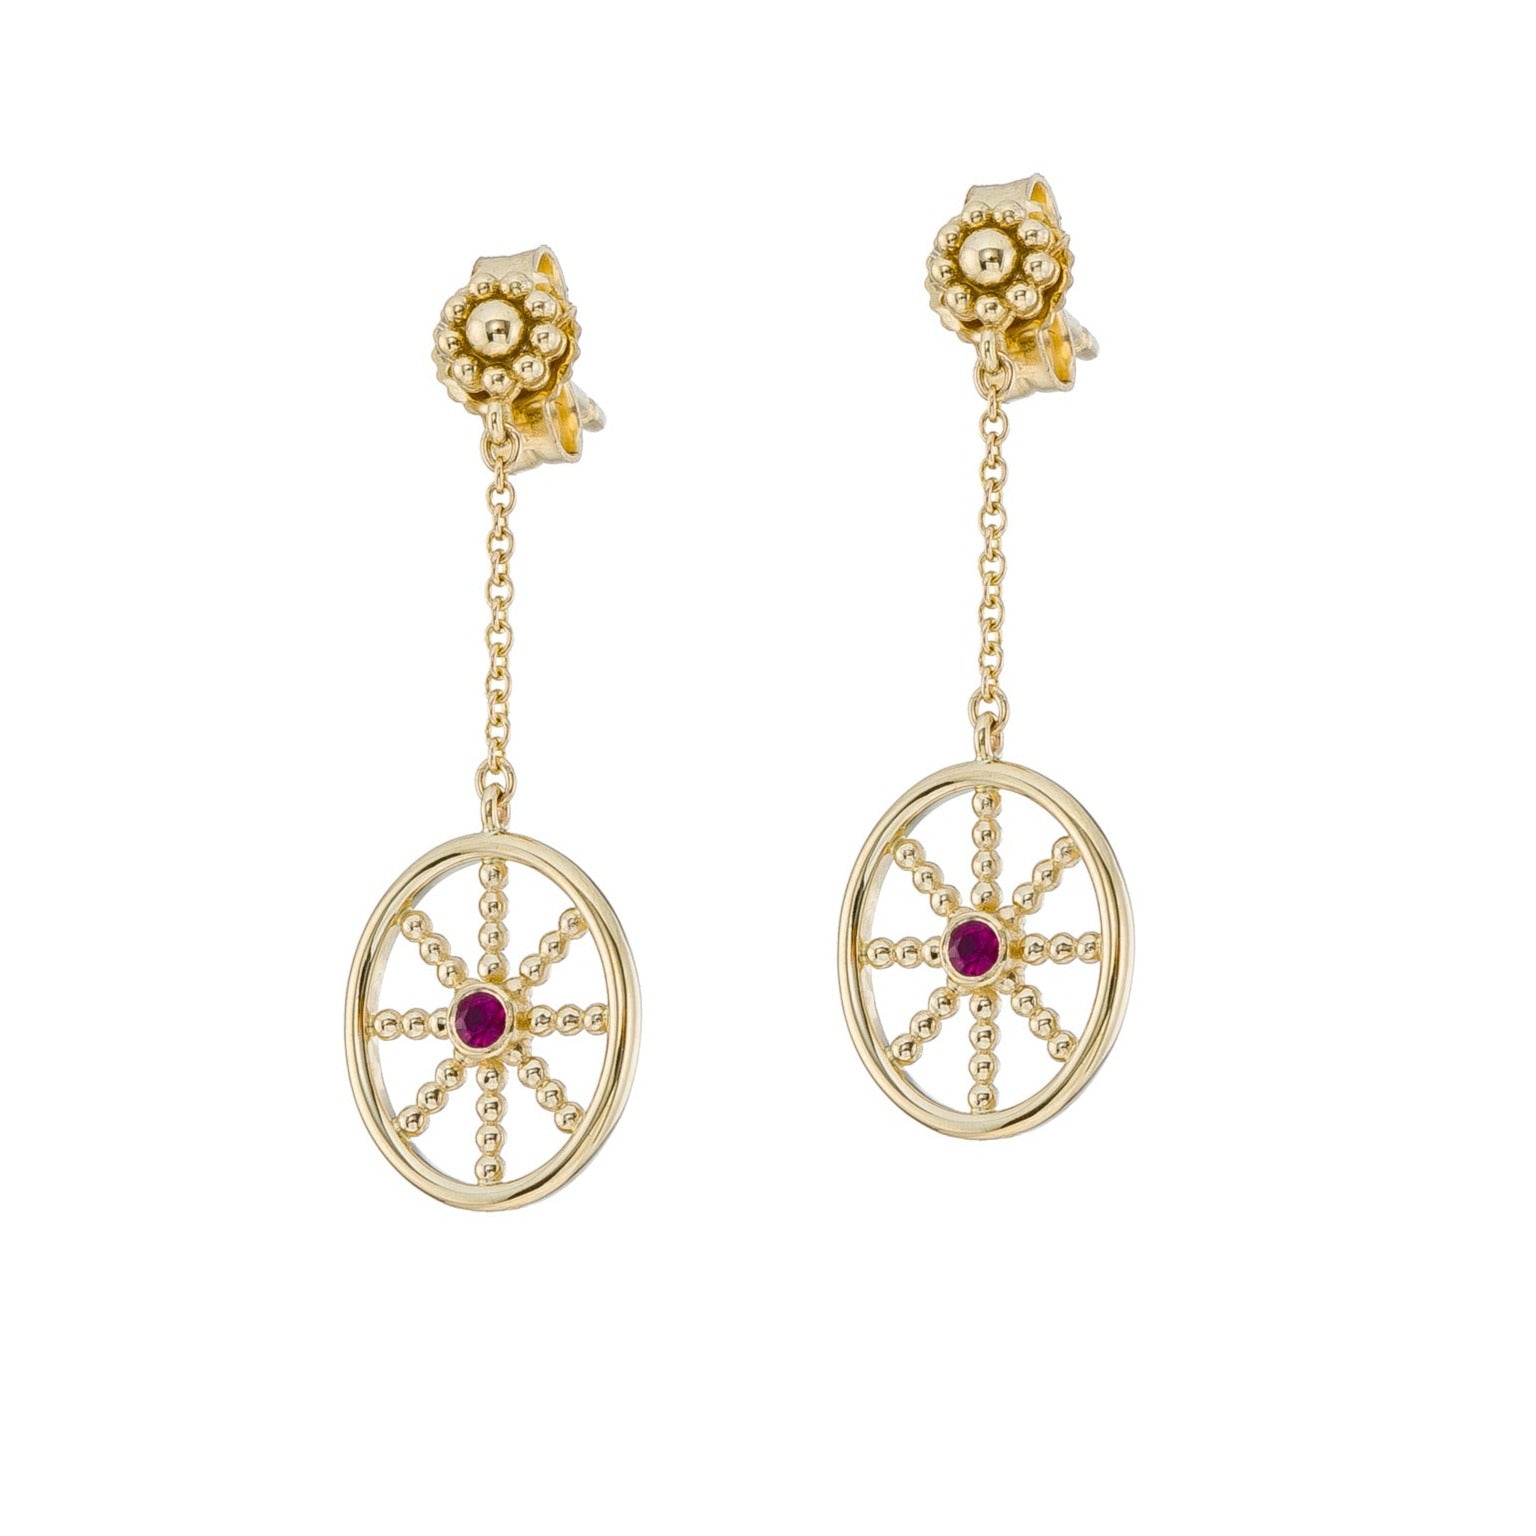 Granulation Gold Earrings with Ruby Odysseus Jewelry